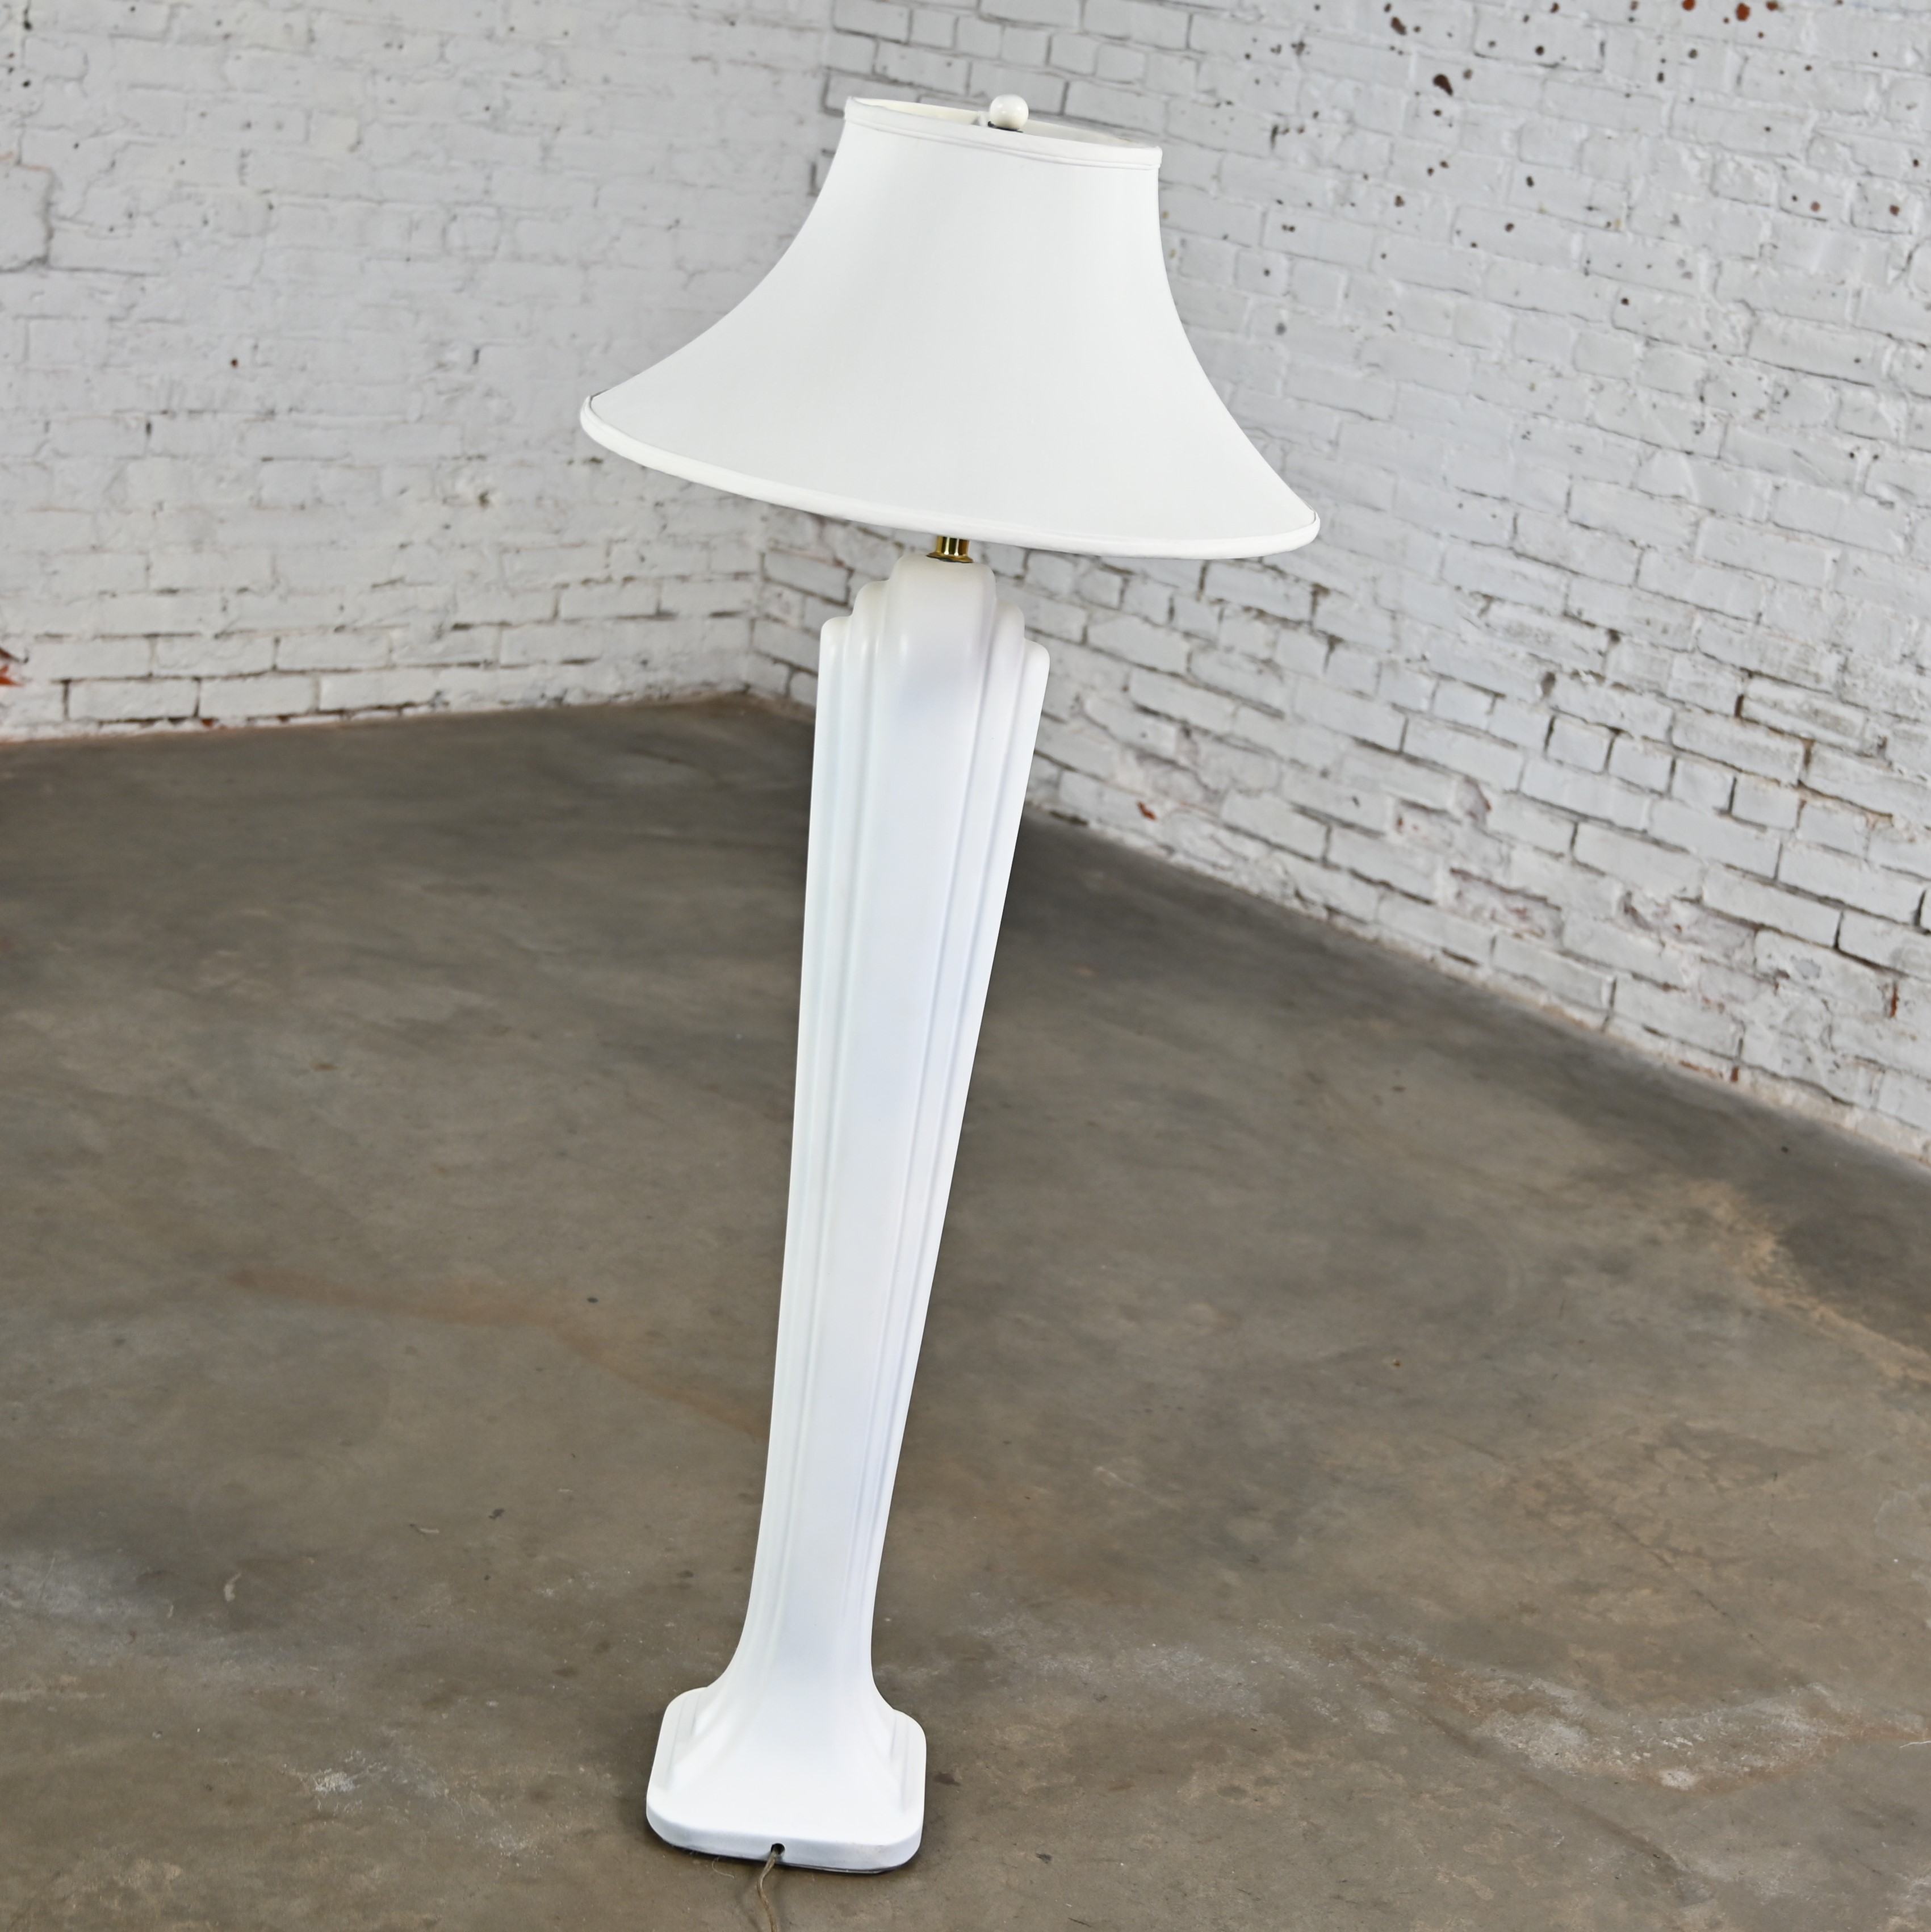 1980’s Art Deco Revival to Postmodern Paolo Gucci Floor Lamp Sculpted Resin & Original Bell Shade